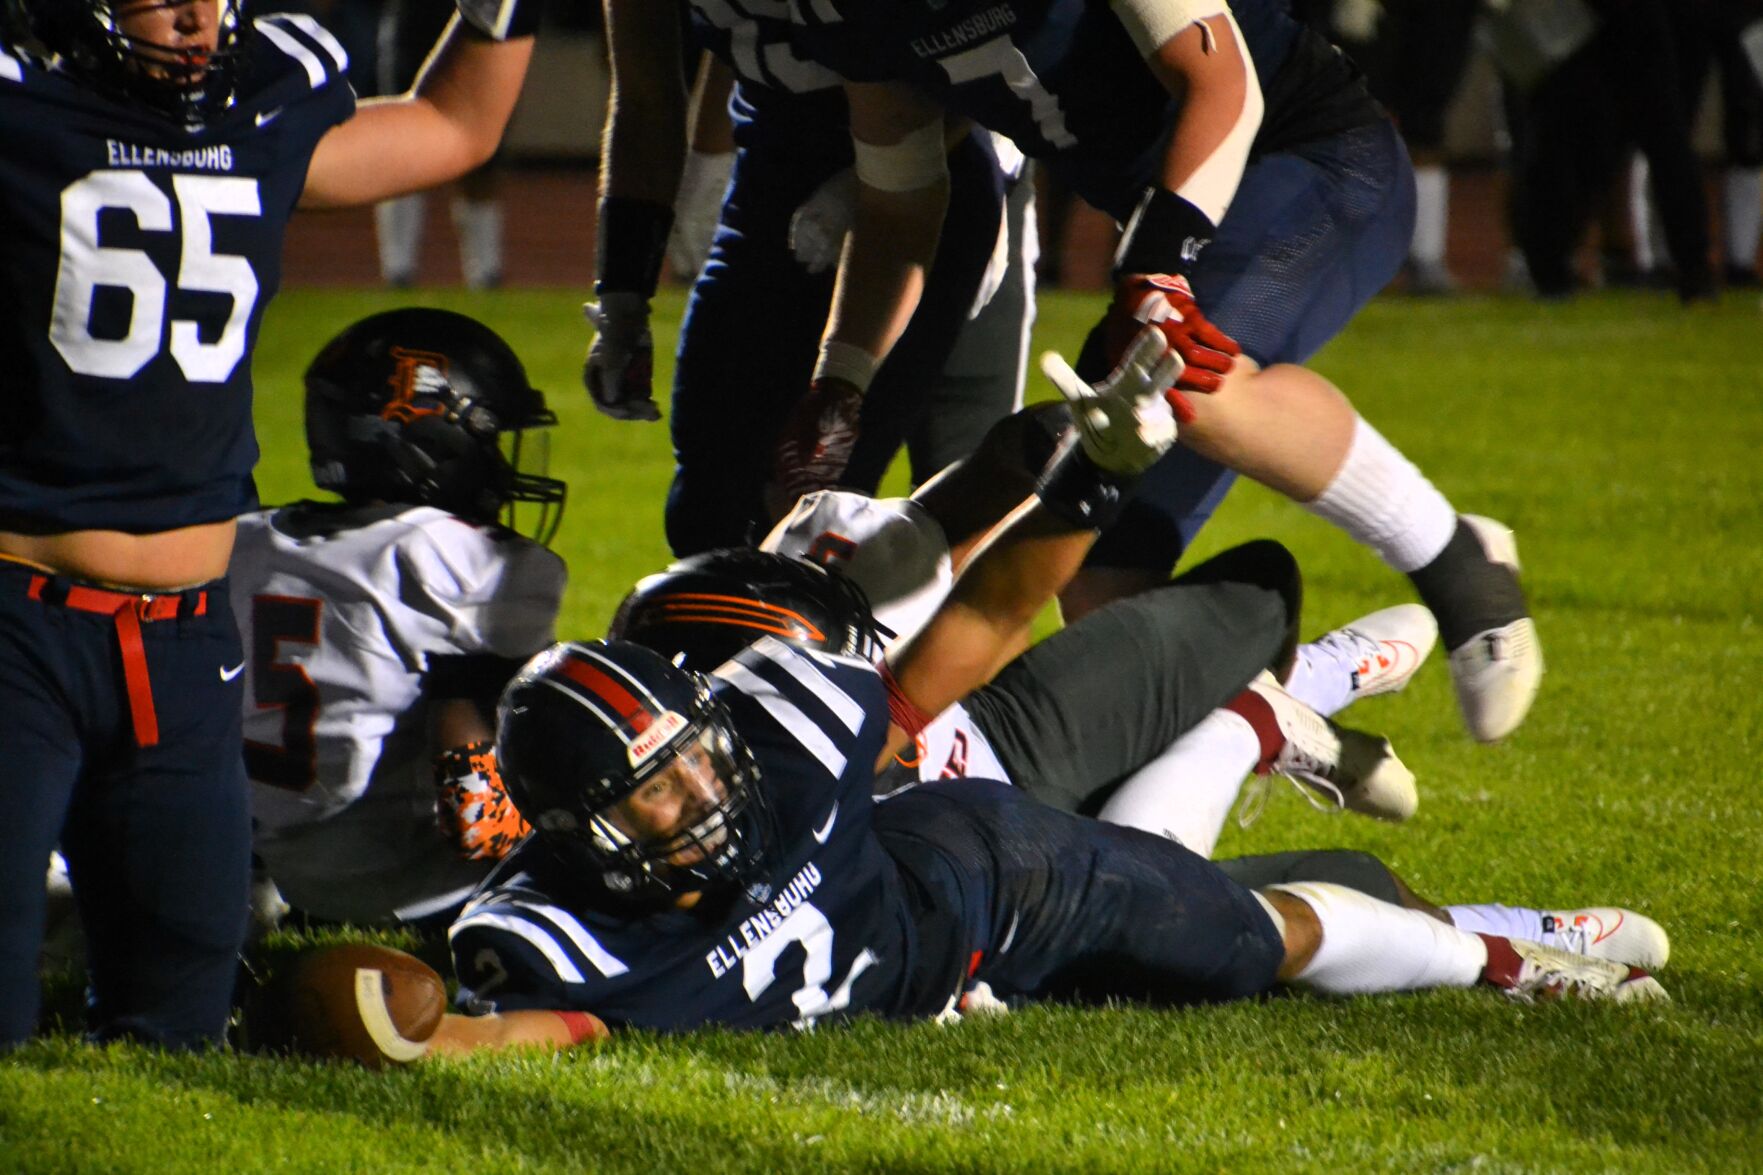 Darius Andaya’s Strong Performance Leads Ellensburg High School to Late Rally in Home Opener Against AC Davis